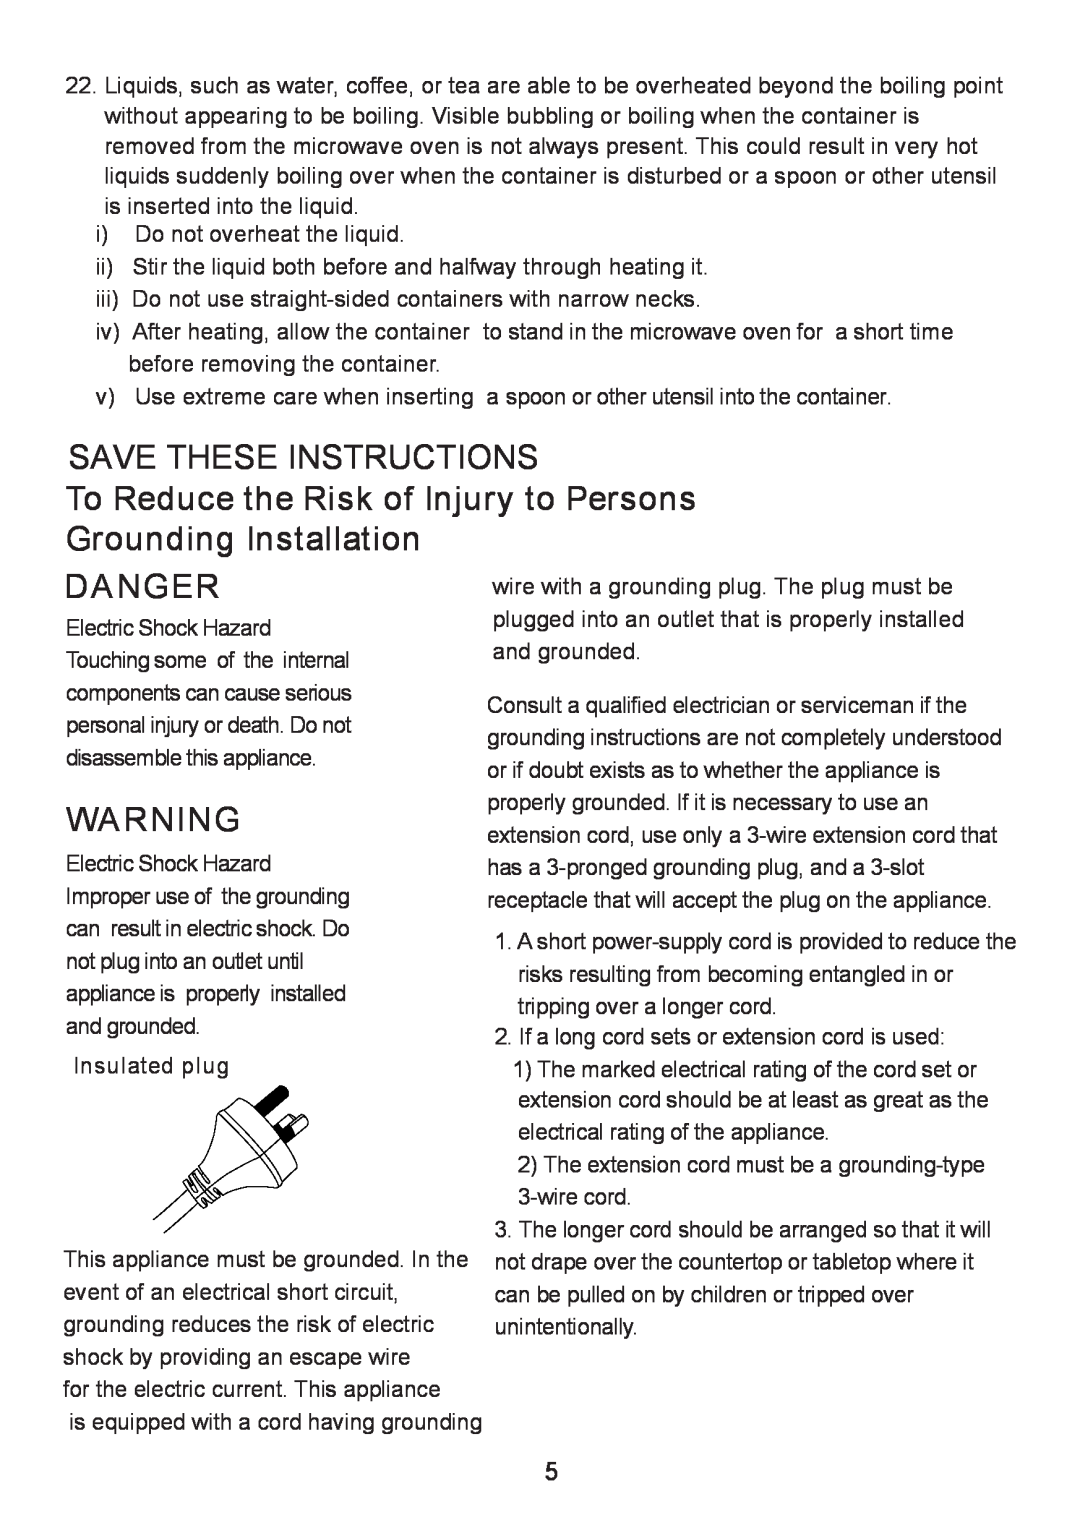 Sanyo EM-S8586V Save These Instructions, To Reduce the Risk of Injury to Persons, Grounding Installation, Danger 